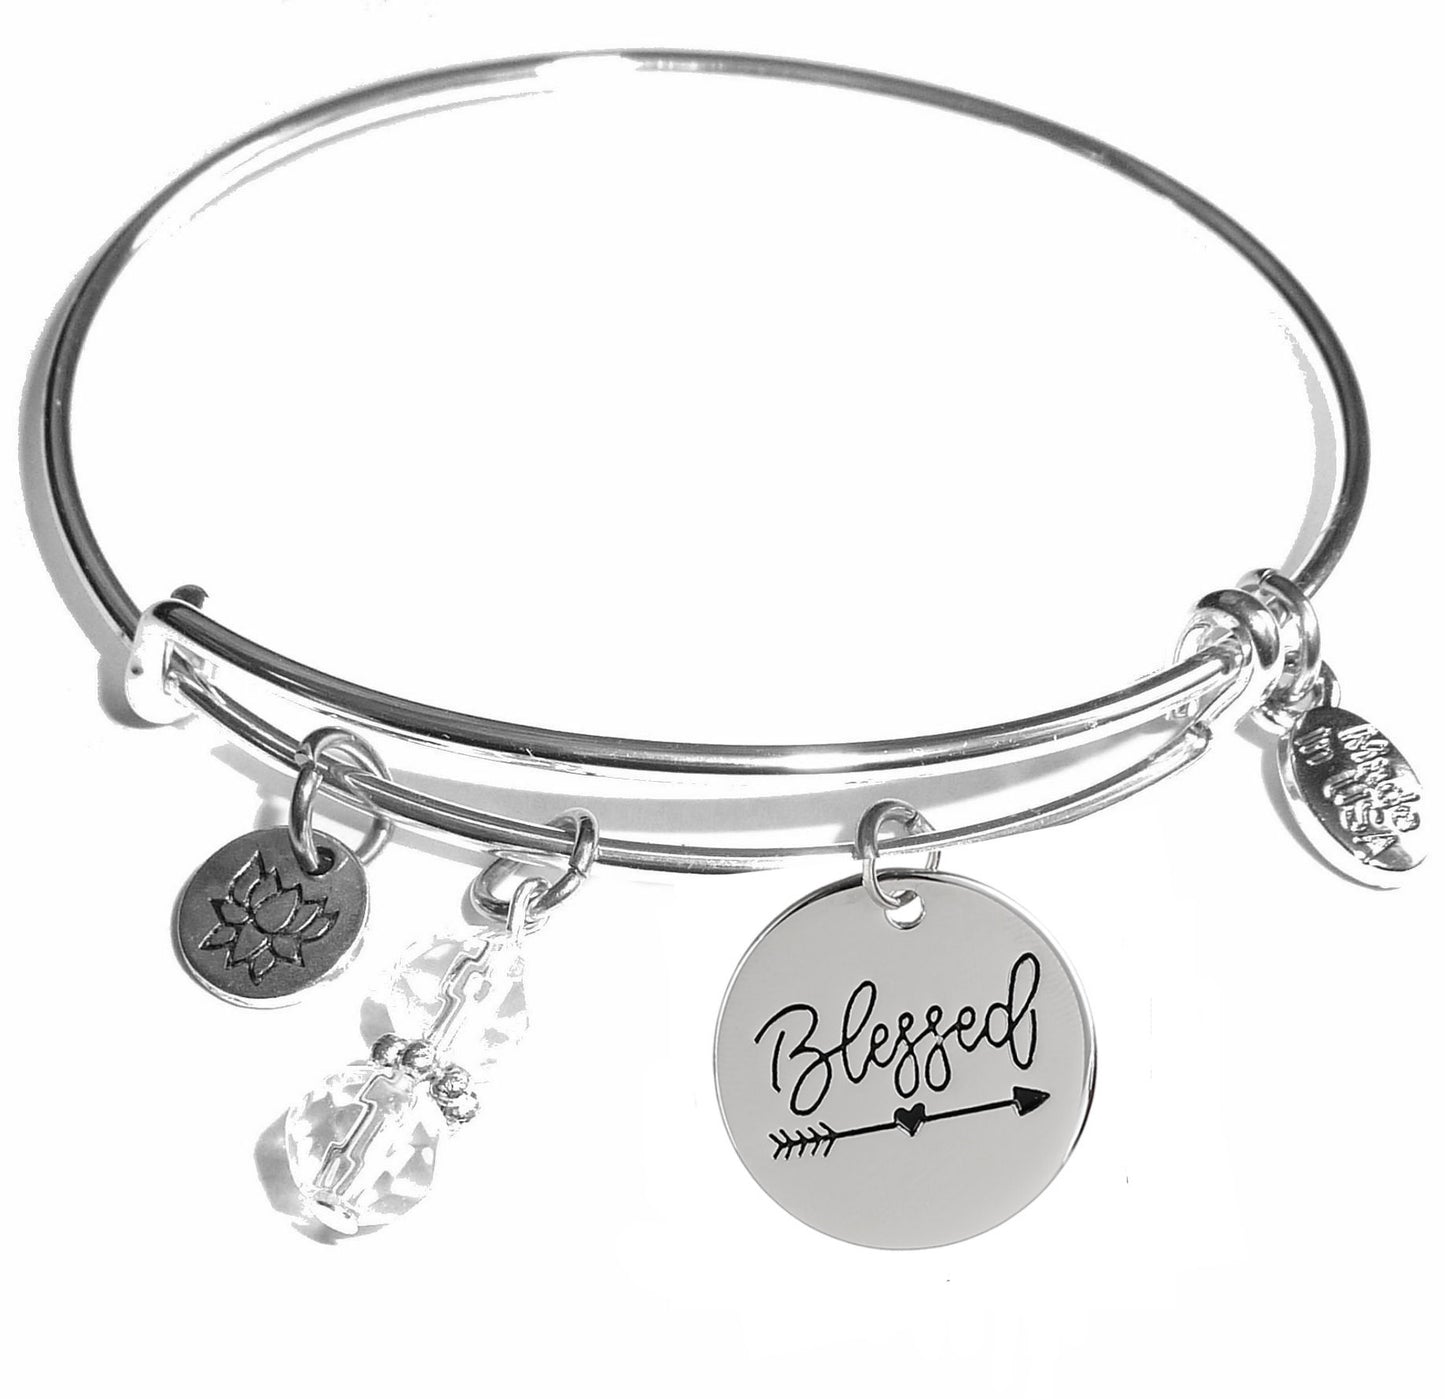 Blessed - Message Bangle Bracelet - Expandable Wire Bracelet – Comes in a gift box